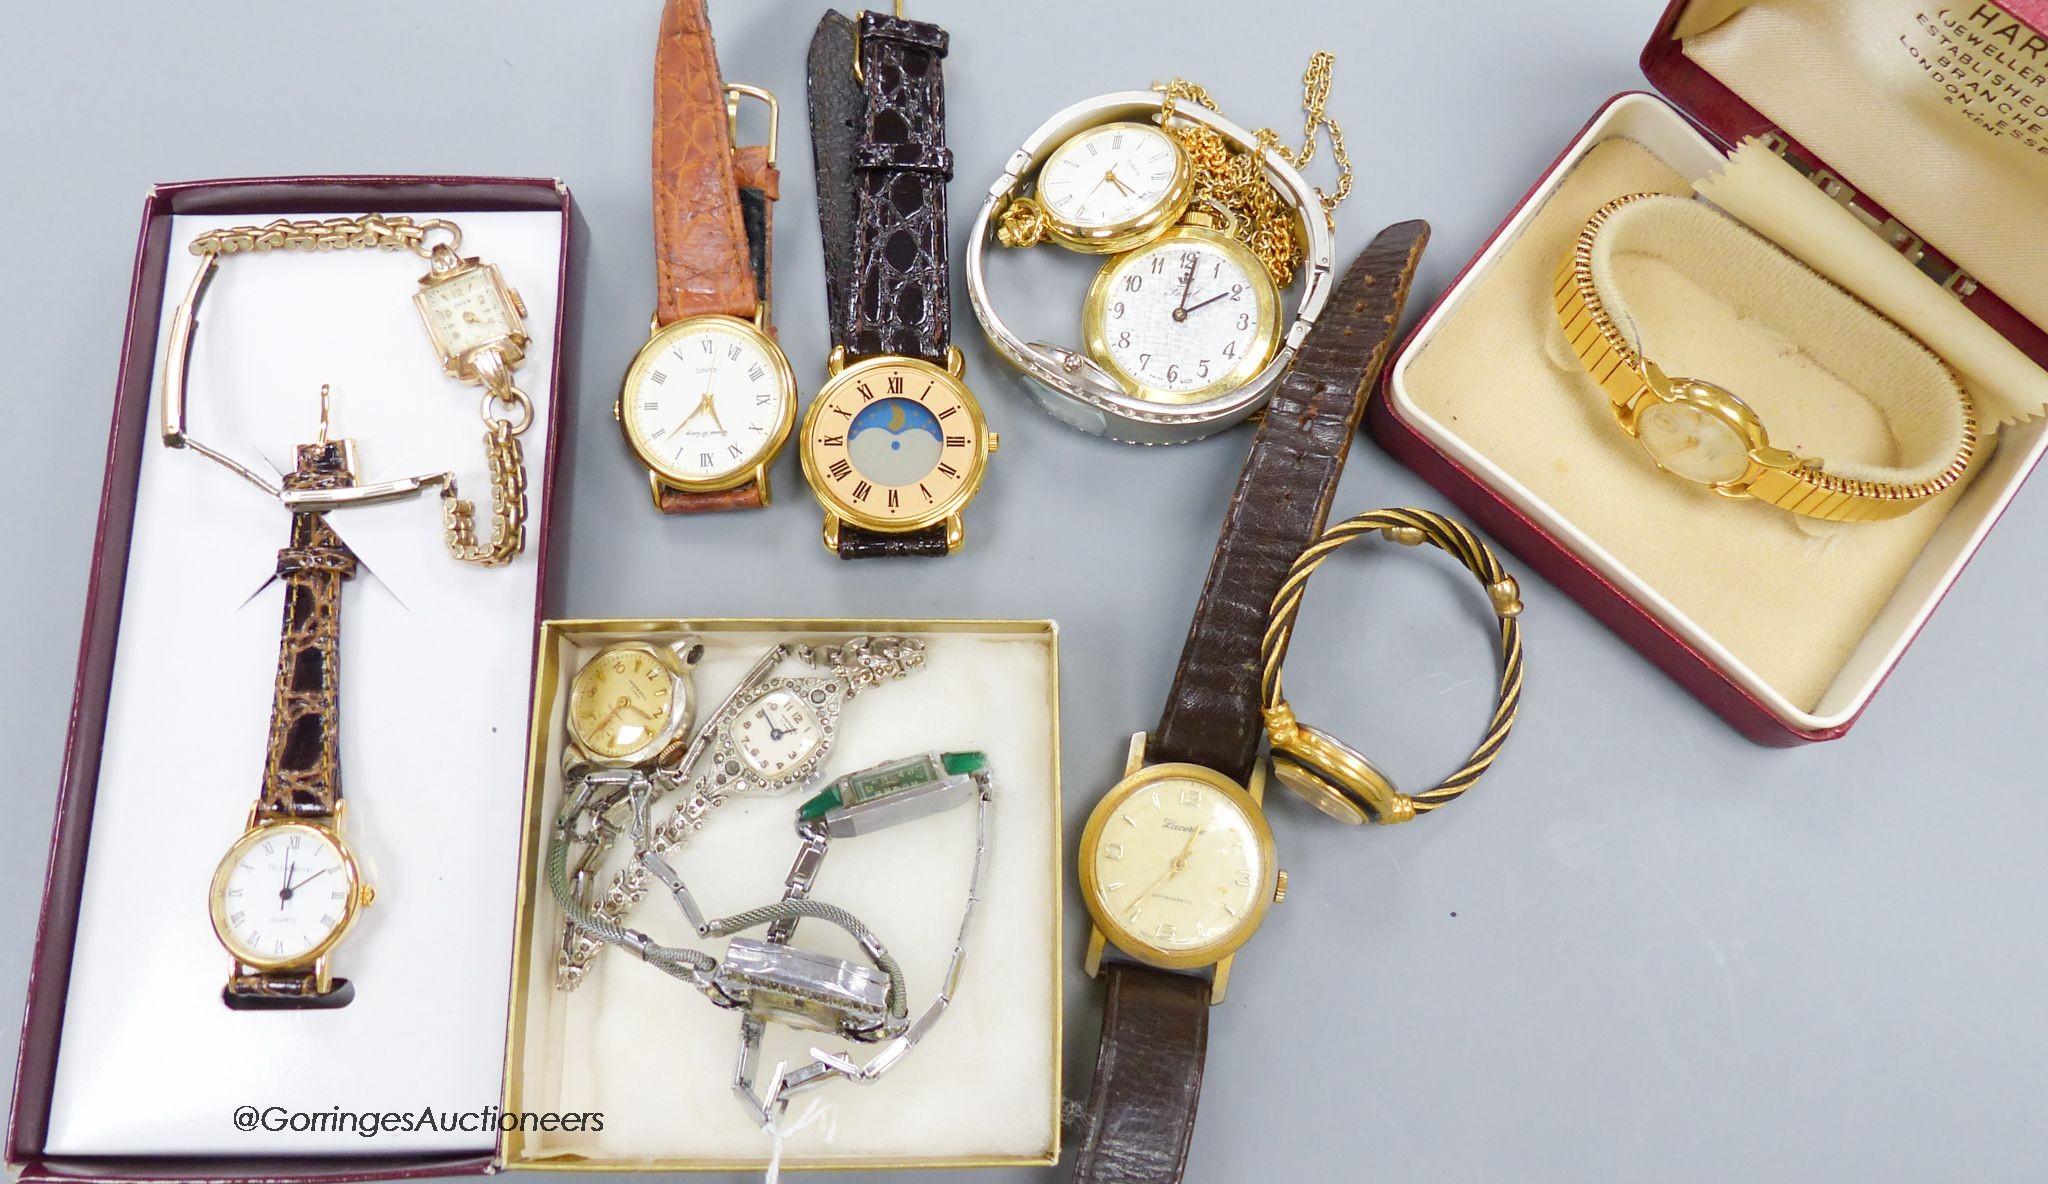 A collection of vintage and designer wristwatches, including an Asprey's ladies' Art Deco paste-set and chrome watch